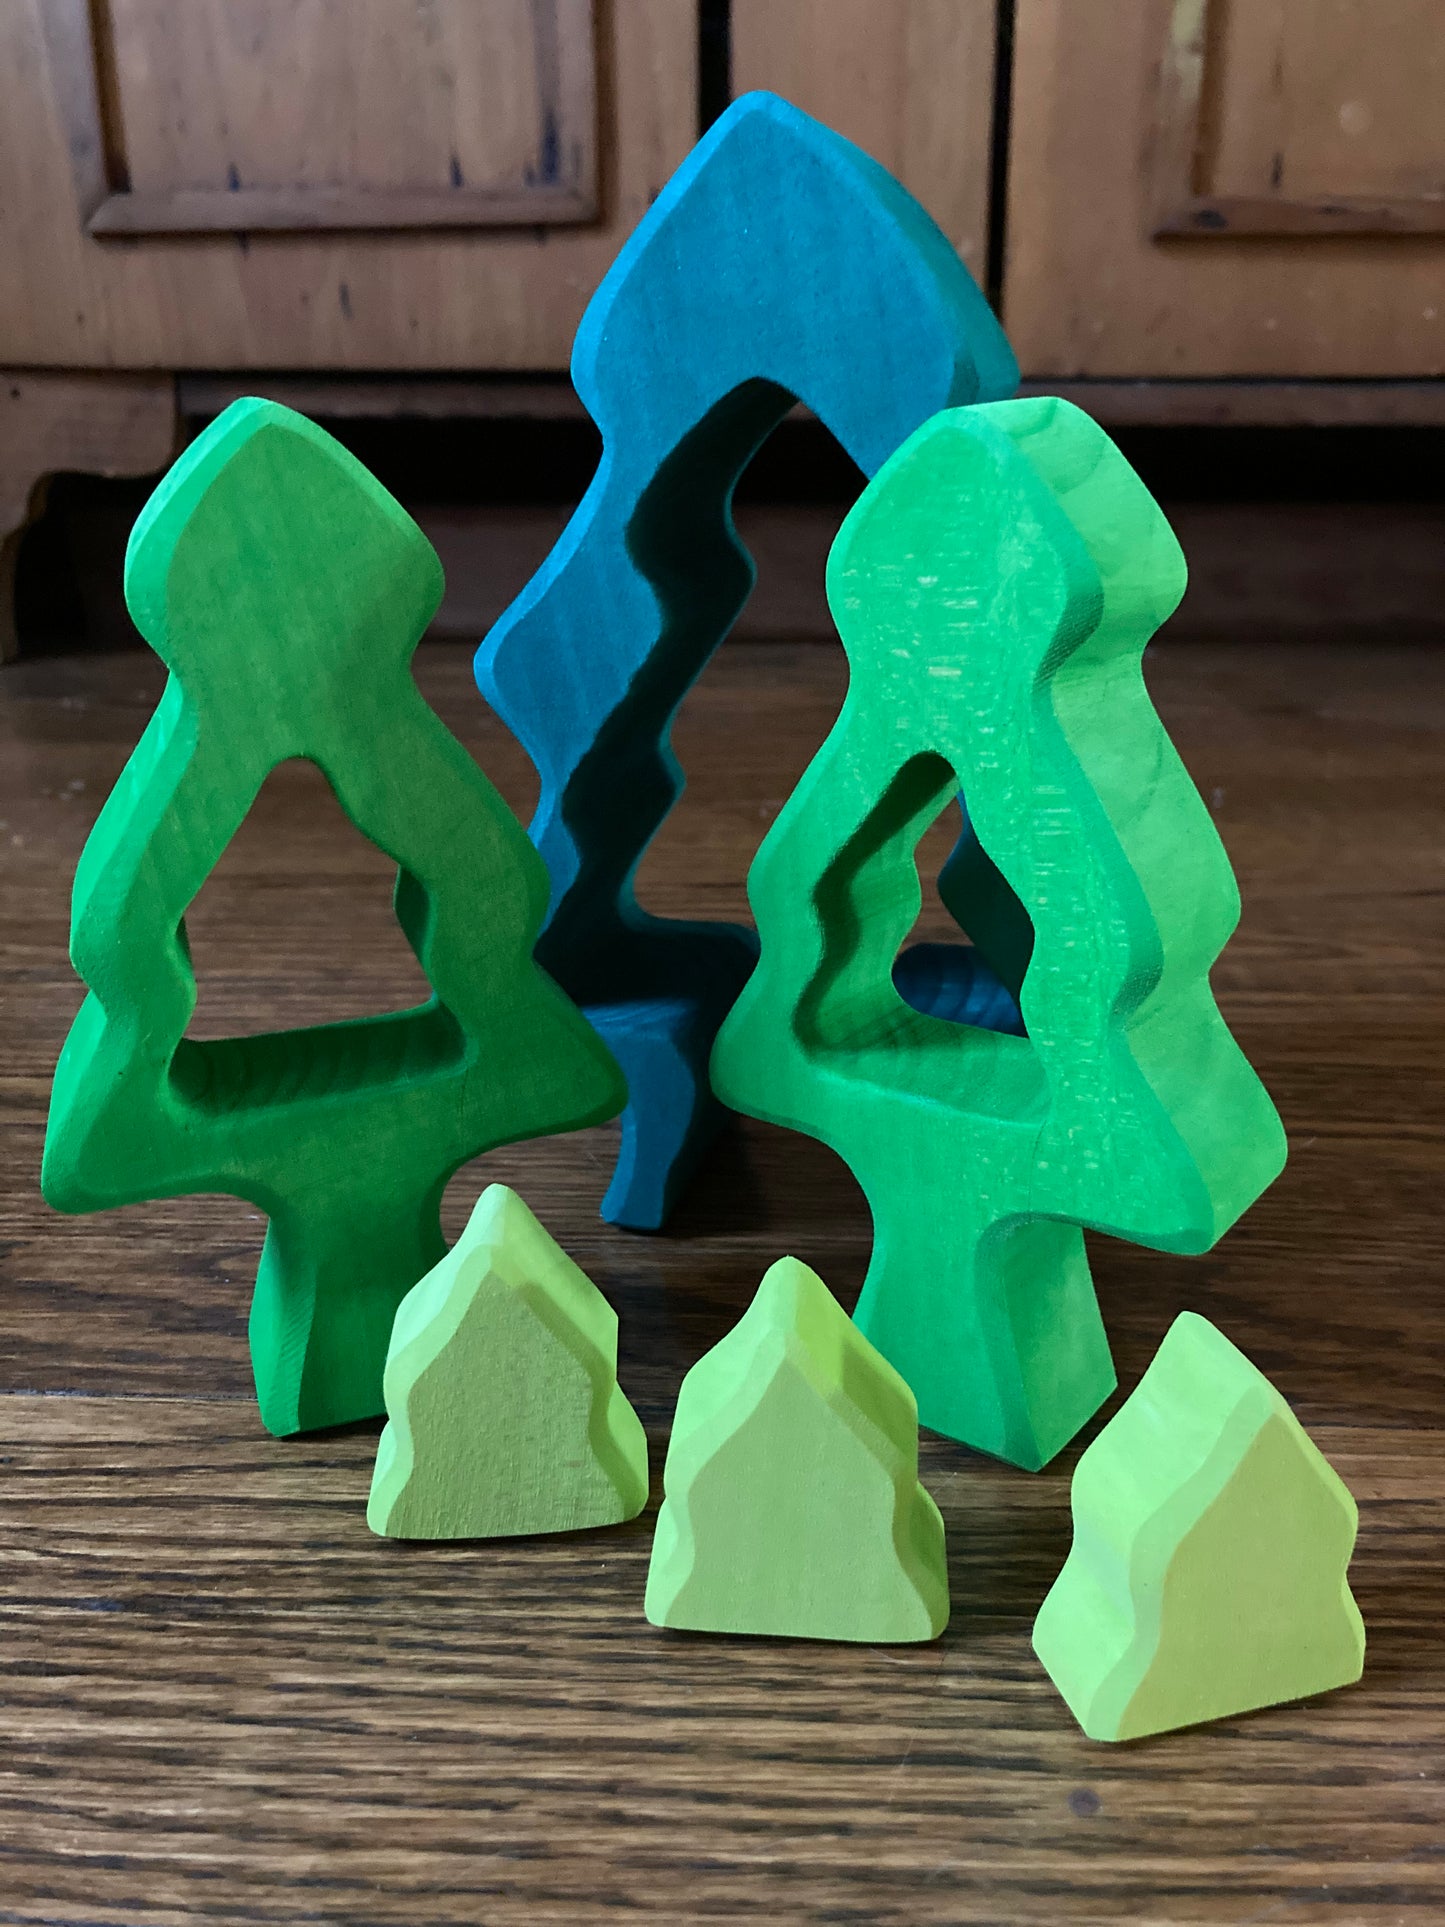 Wooden Dollhouse Play - PINE FIR TREE PUZZLE